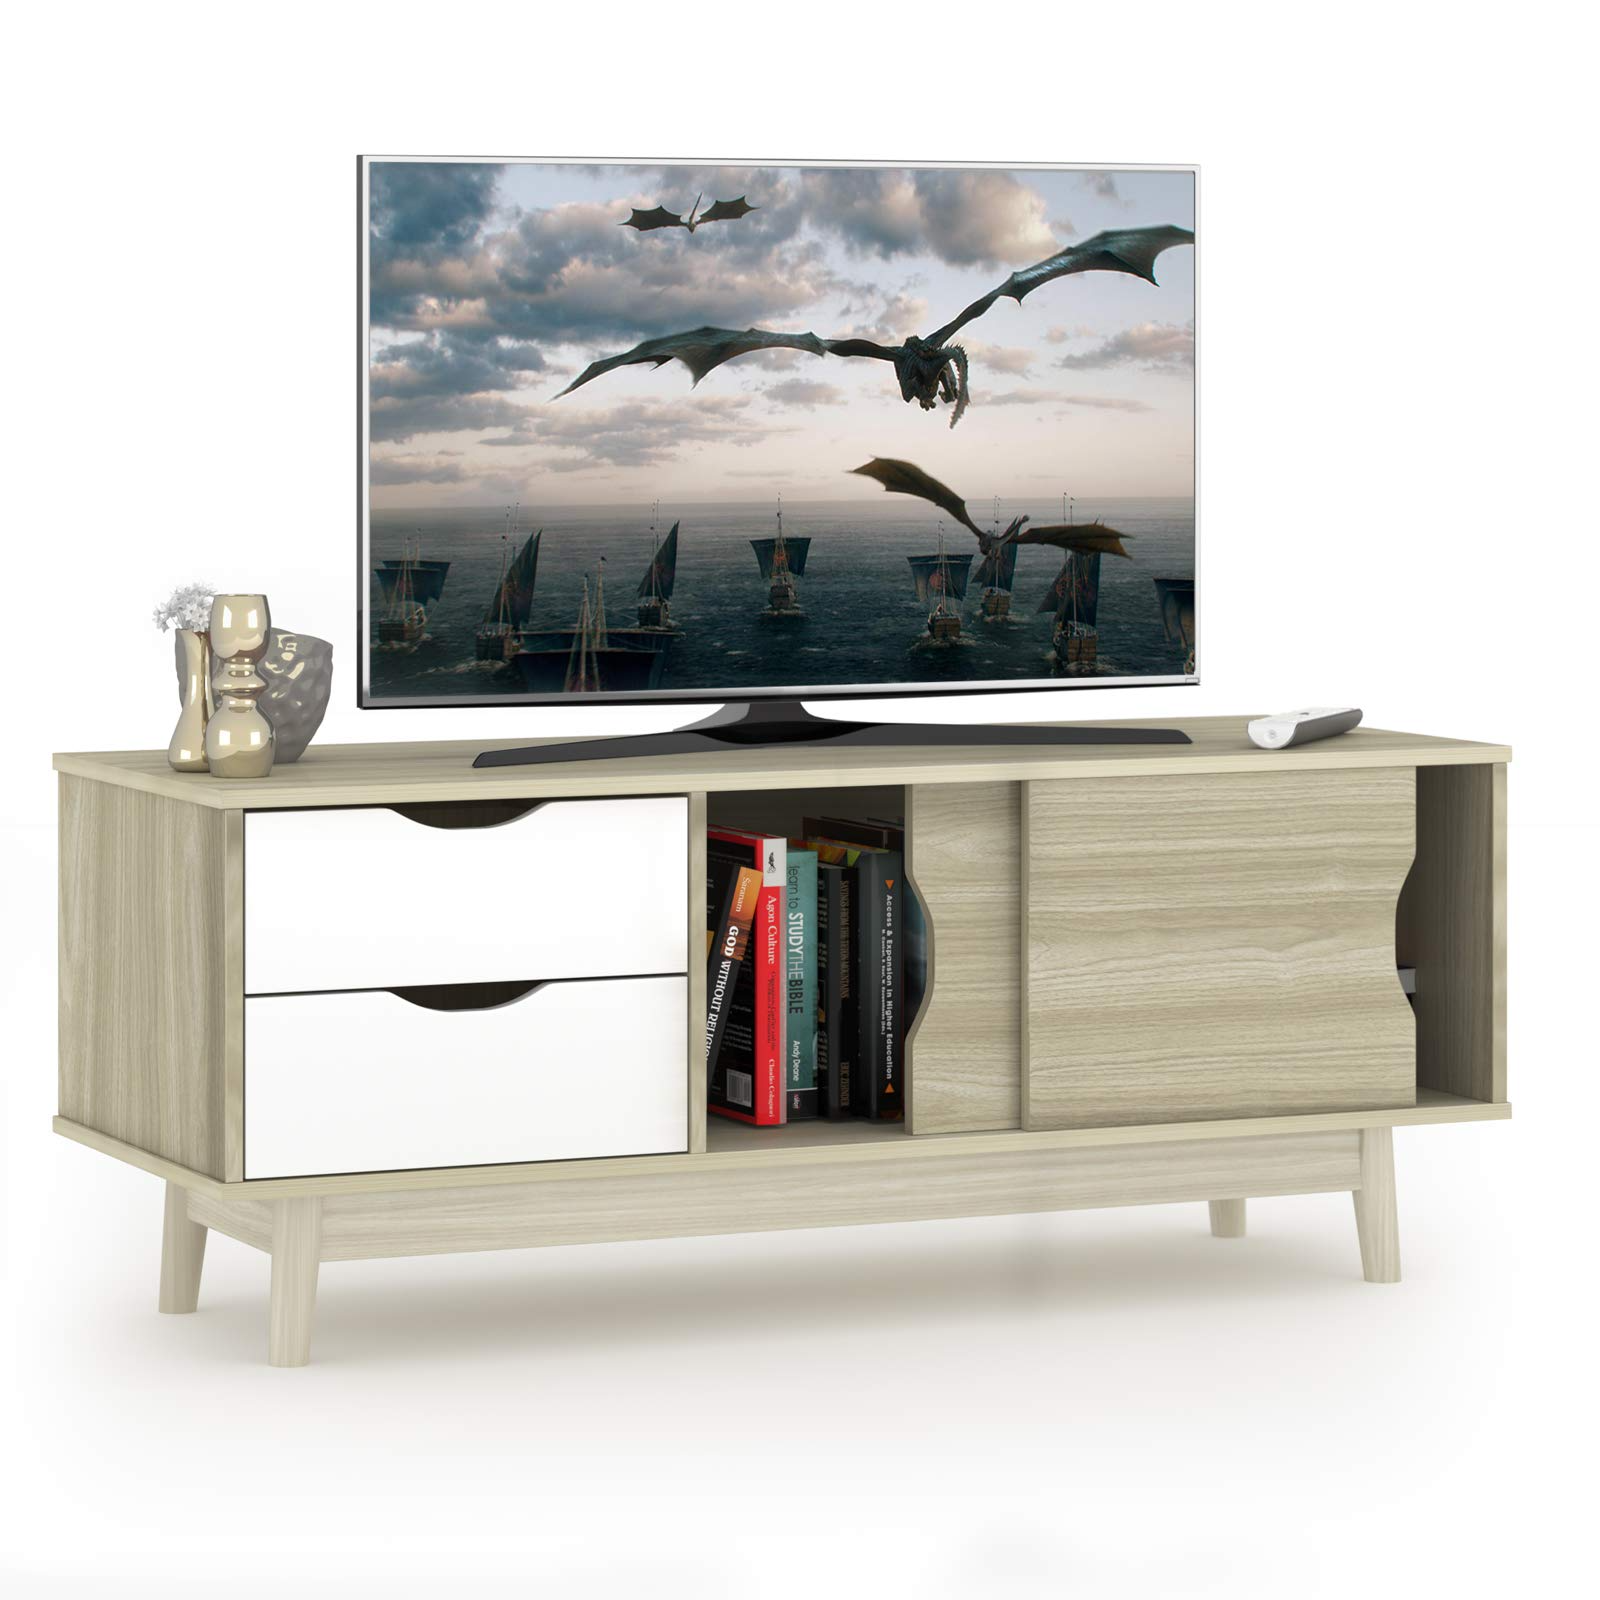 Tangkula Modern TV Stand for Flat TVs Up to 60 Inches, Wood TV Console Table w/ 2 Drawers & 2 Sliding Doors